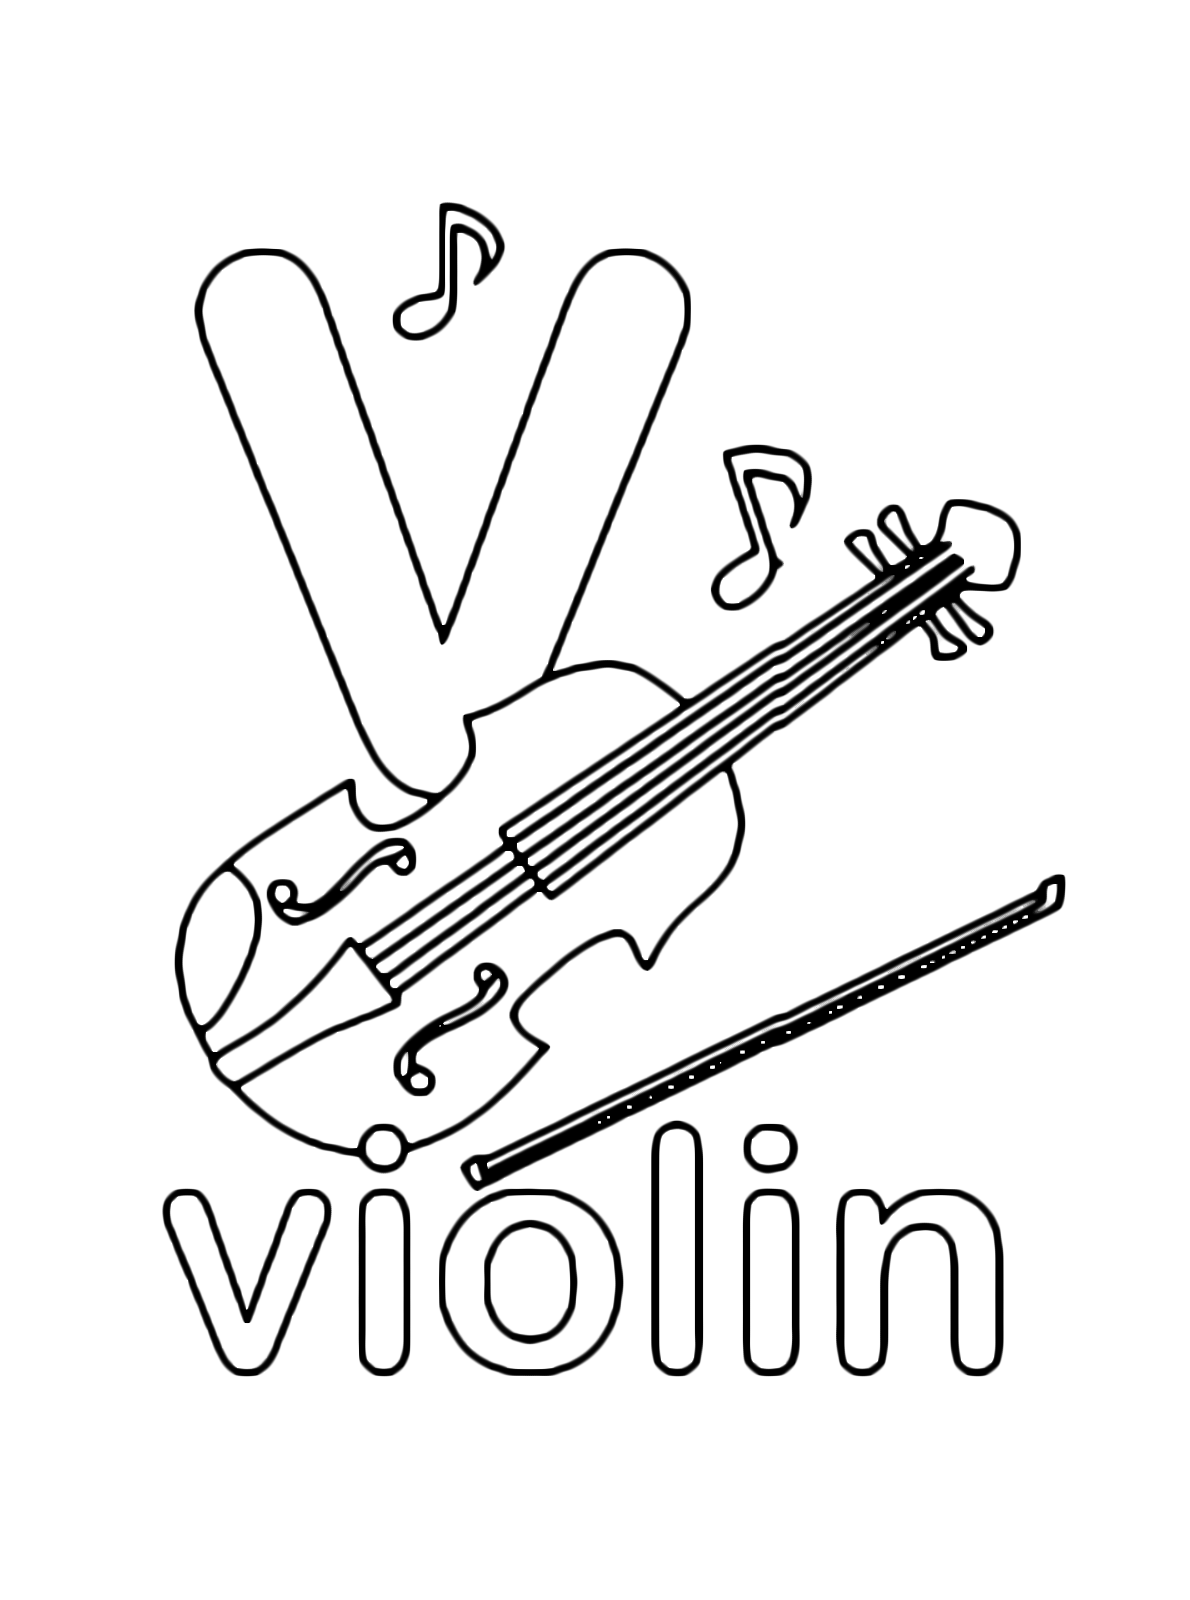 Letters and numbers - v for violin lowercase letter